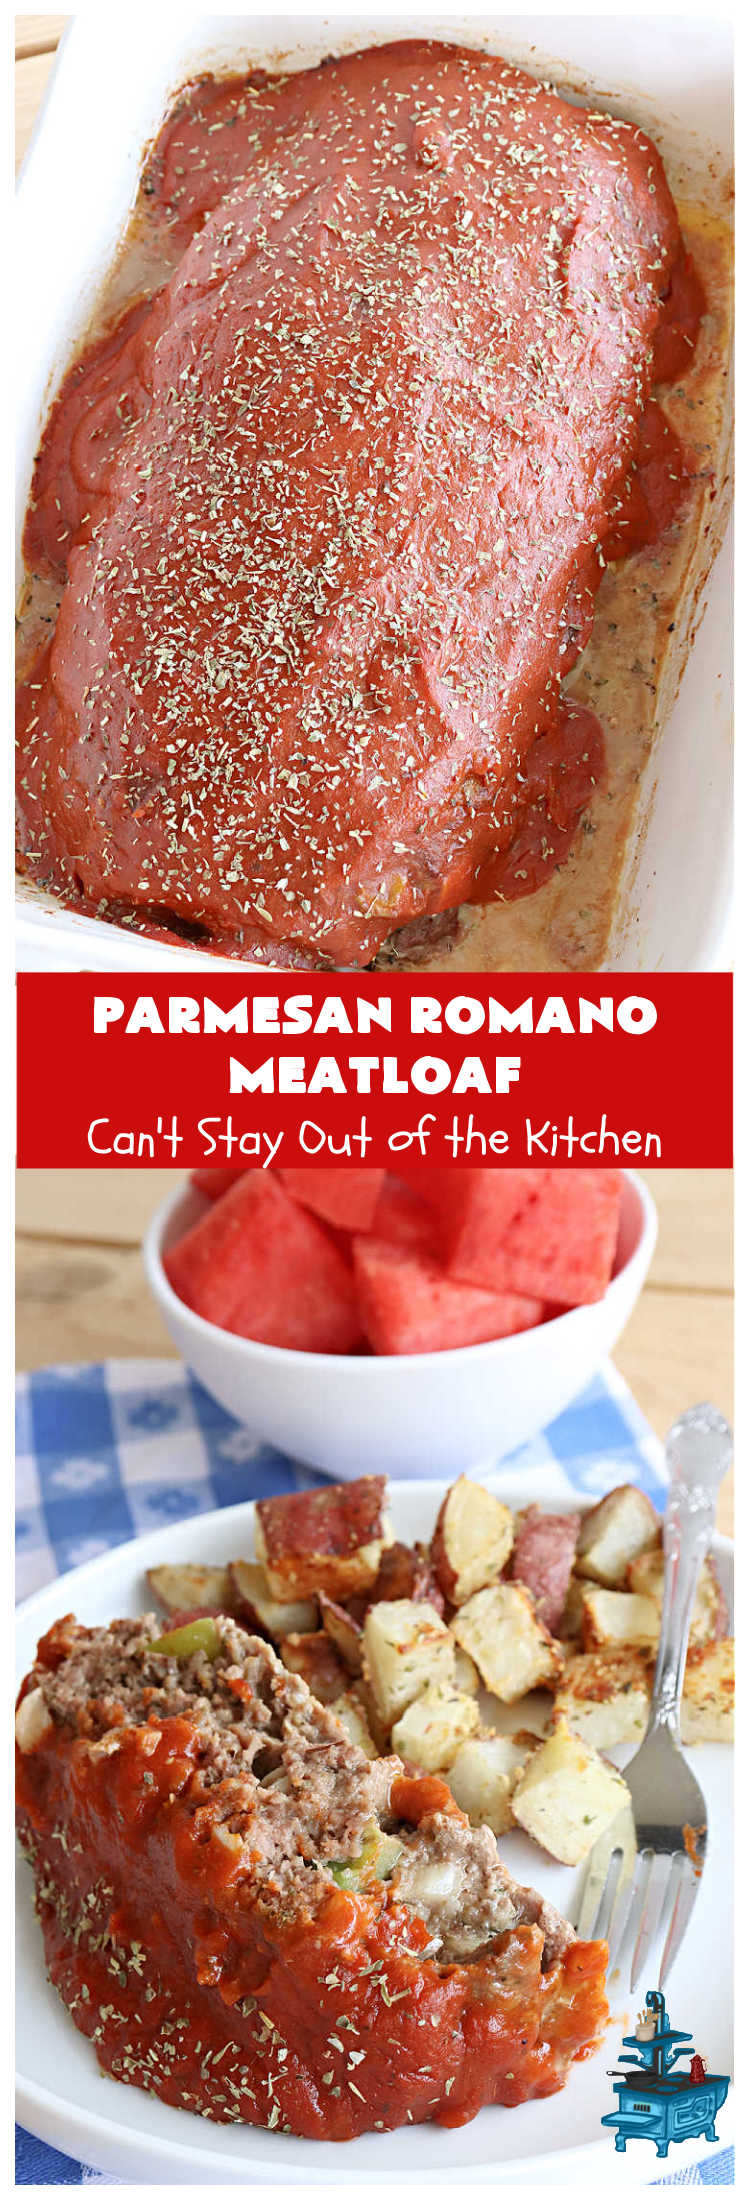 Parmesan Romano Meatloaf | Can't Stay Out of the Kitchen | this tasty #Italian-style #meatloaf uses grated #Parmesan & #Romano #cheese to bind together. It's a #healthy, delicious  & #GlutenFree alternative to regular meatloaf. #PizzaSauce & #ItalianSeasoning on top causes this entree to pop in flavor. If you enjoy meatloaf, you'll love this version for weeknight dinners. #beef #GroundBeef #ParmesanRomanoMeatloaf